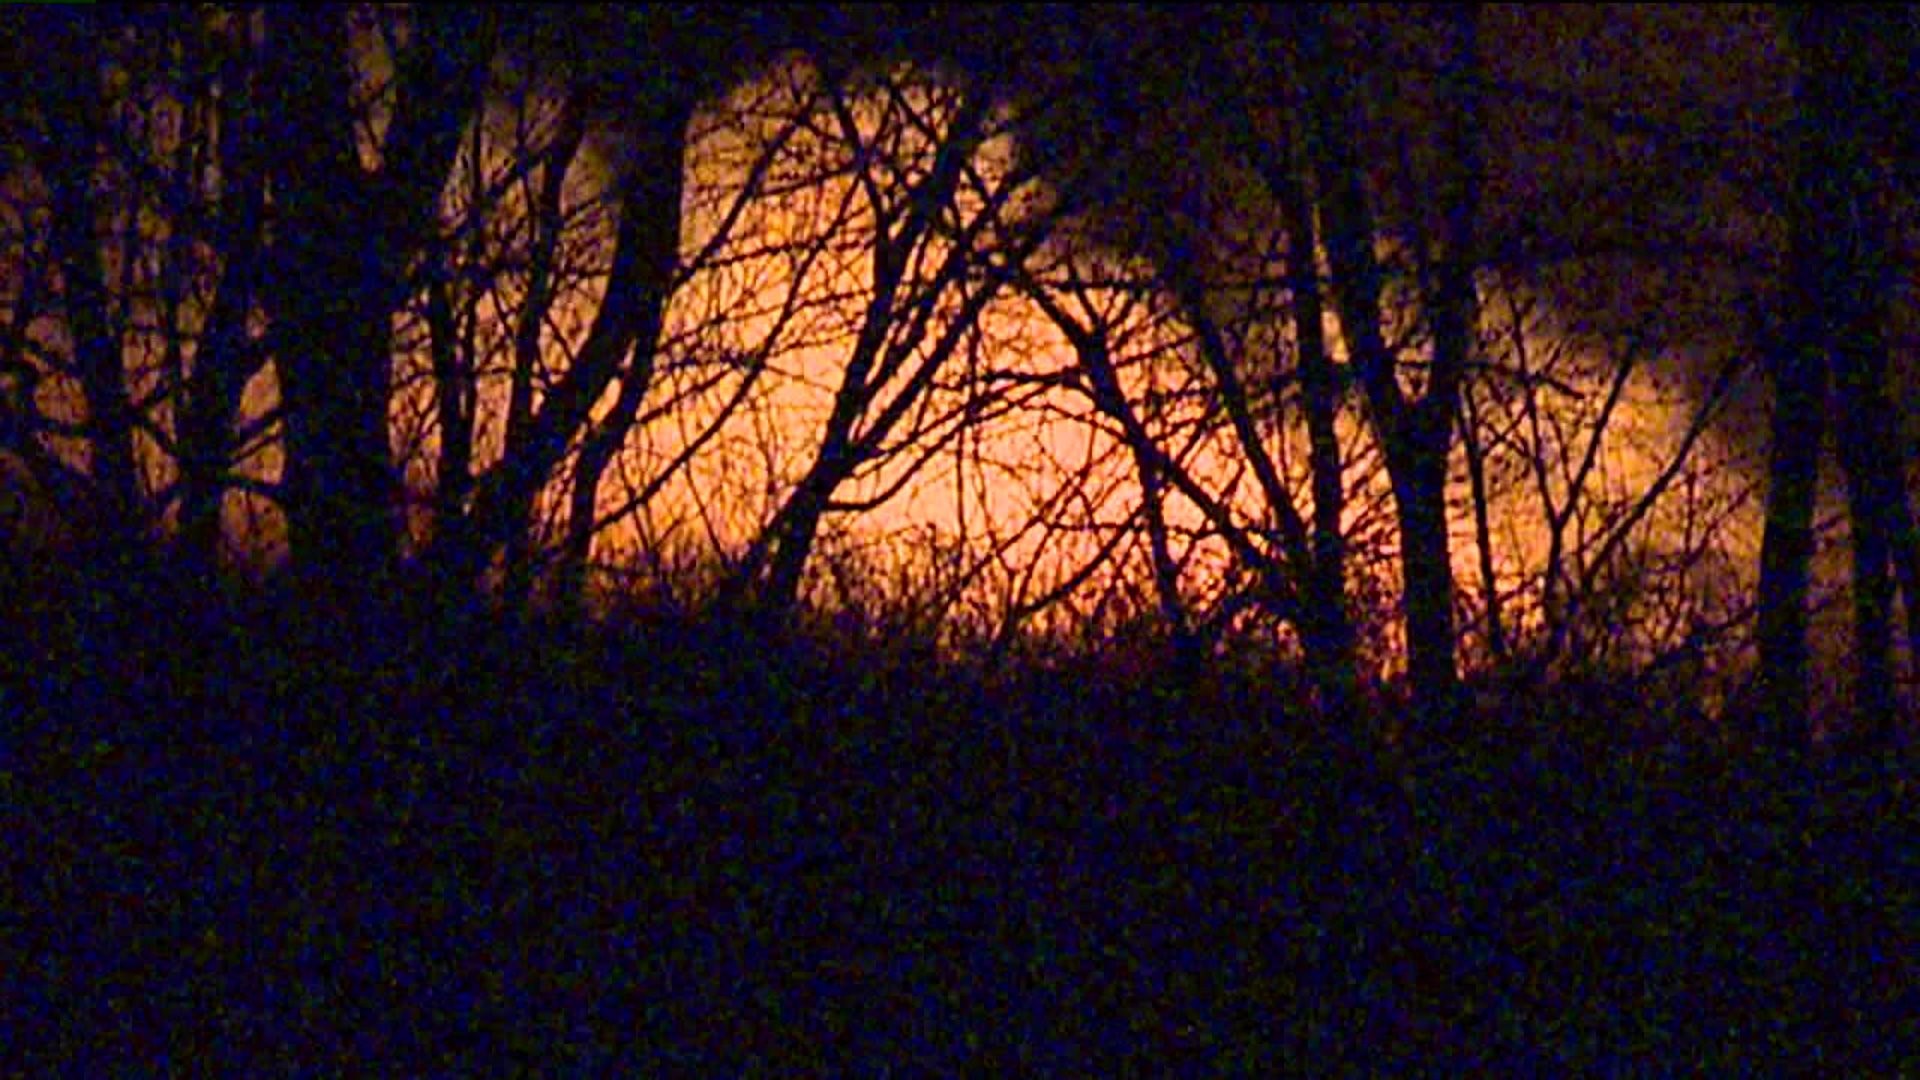 Crews Battle Brush Fires Overnight in Luzerne County